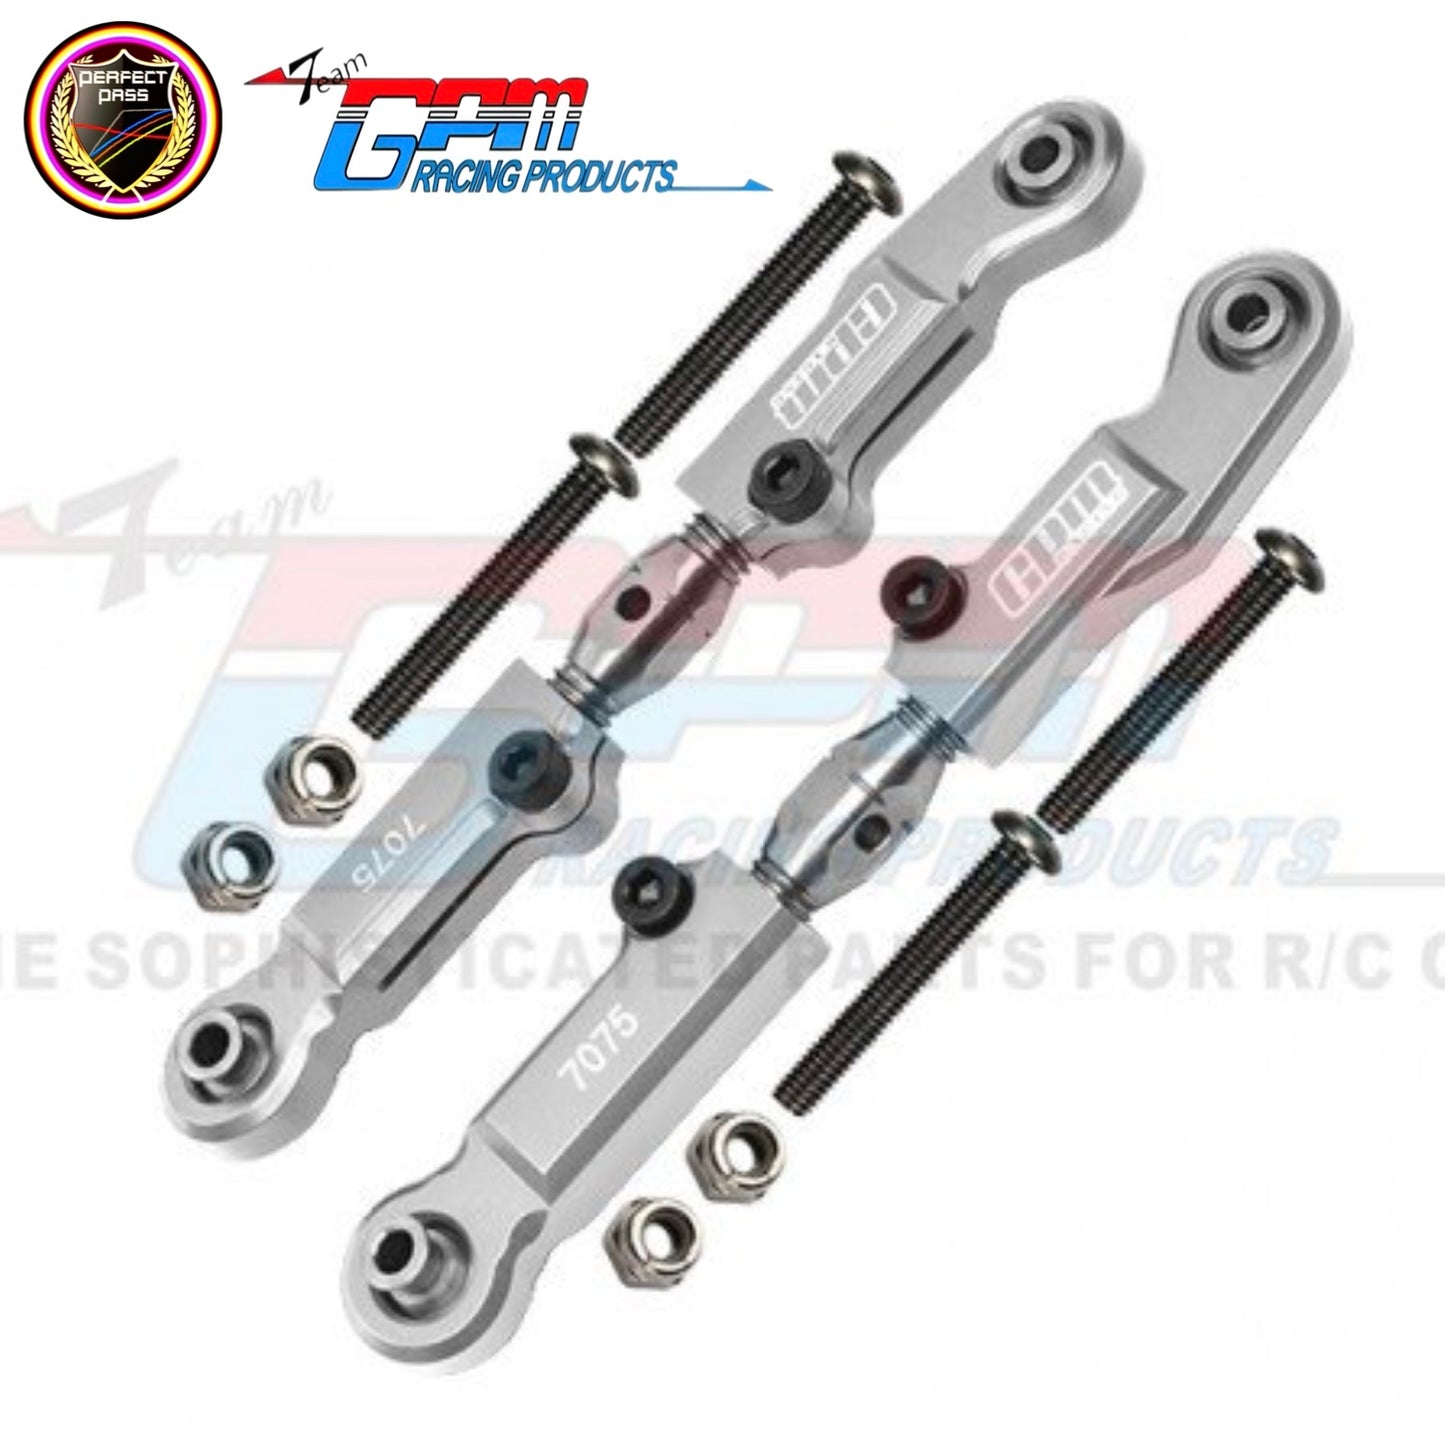 GPM Arrma Limitless/Infraction/Felony 7075 Aluminum+Stainless Steel Rear Camber Links